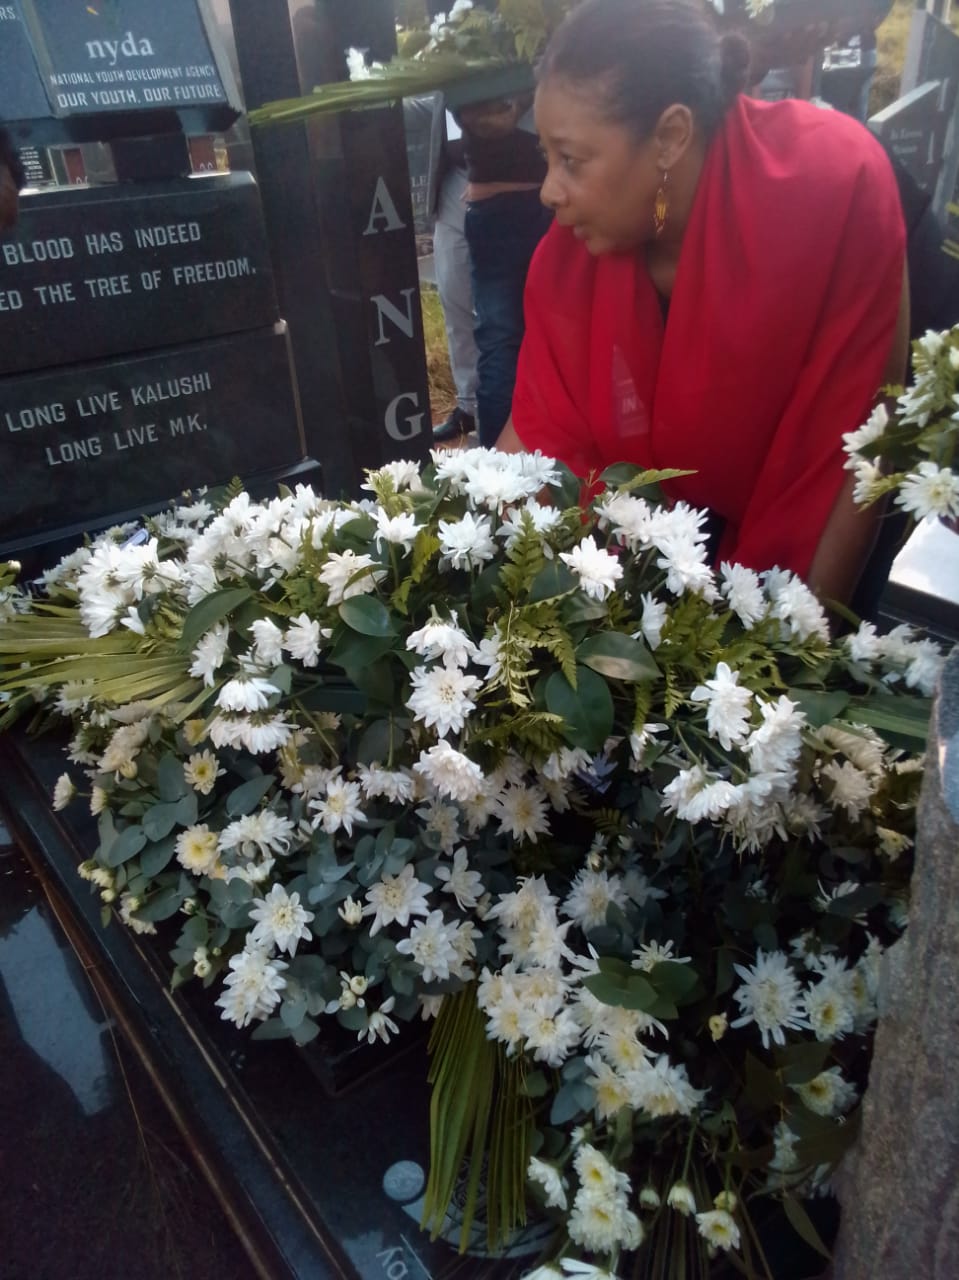 Reneva Fourie of SACP laying wreaths at Mahlangu's tombstone phot by Peter Mothiba